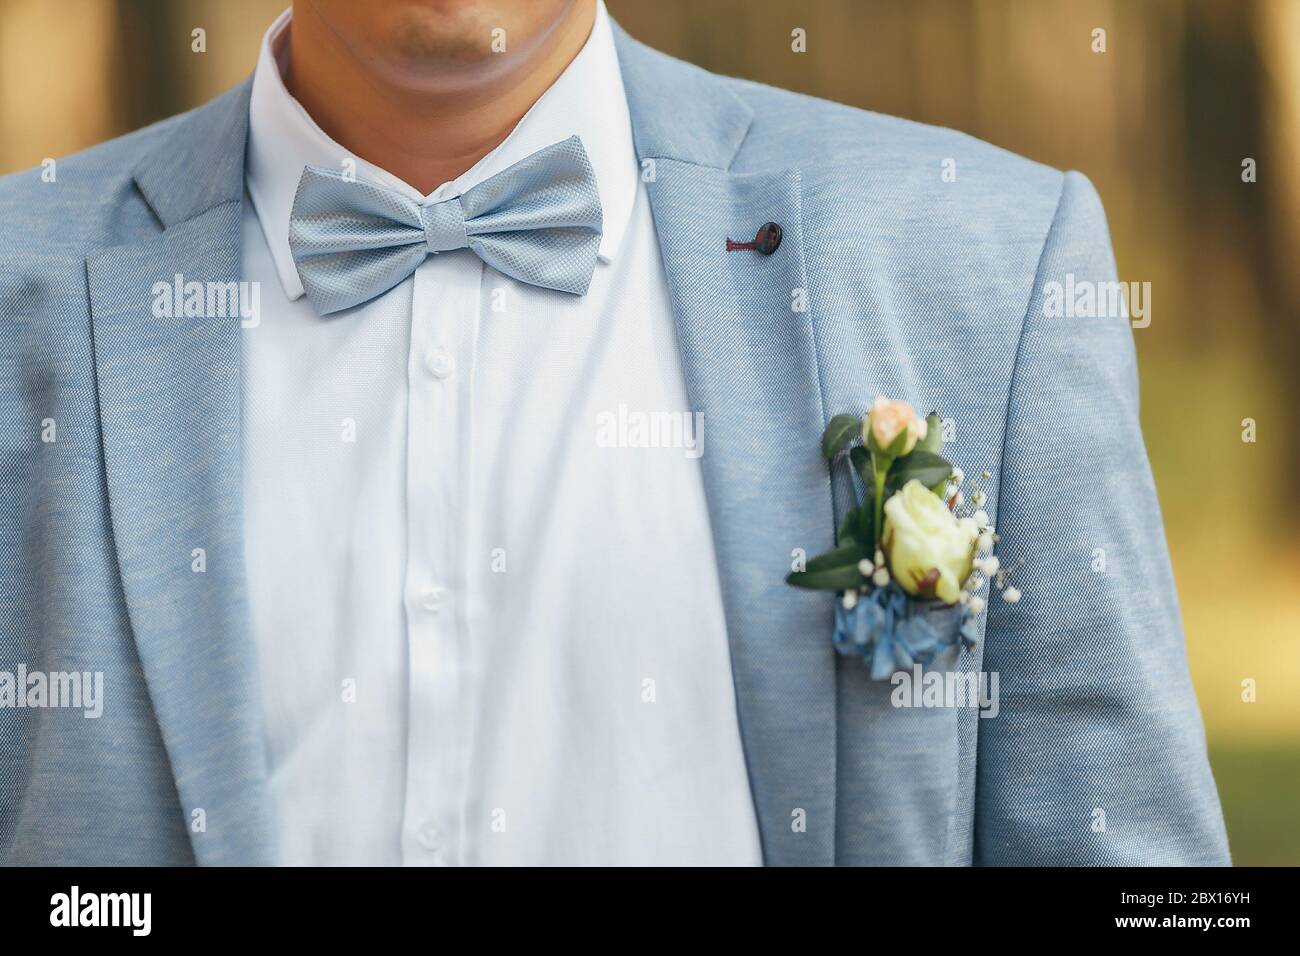 Groom in a blue jacket with a blue bow-tie. On the jacket is a boutonniere of roses Stock Photo